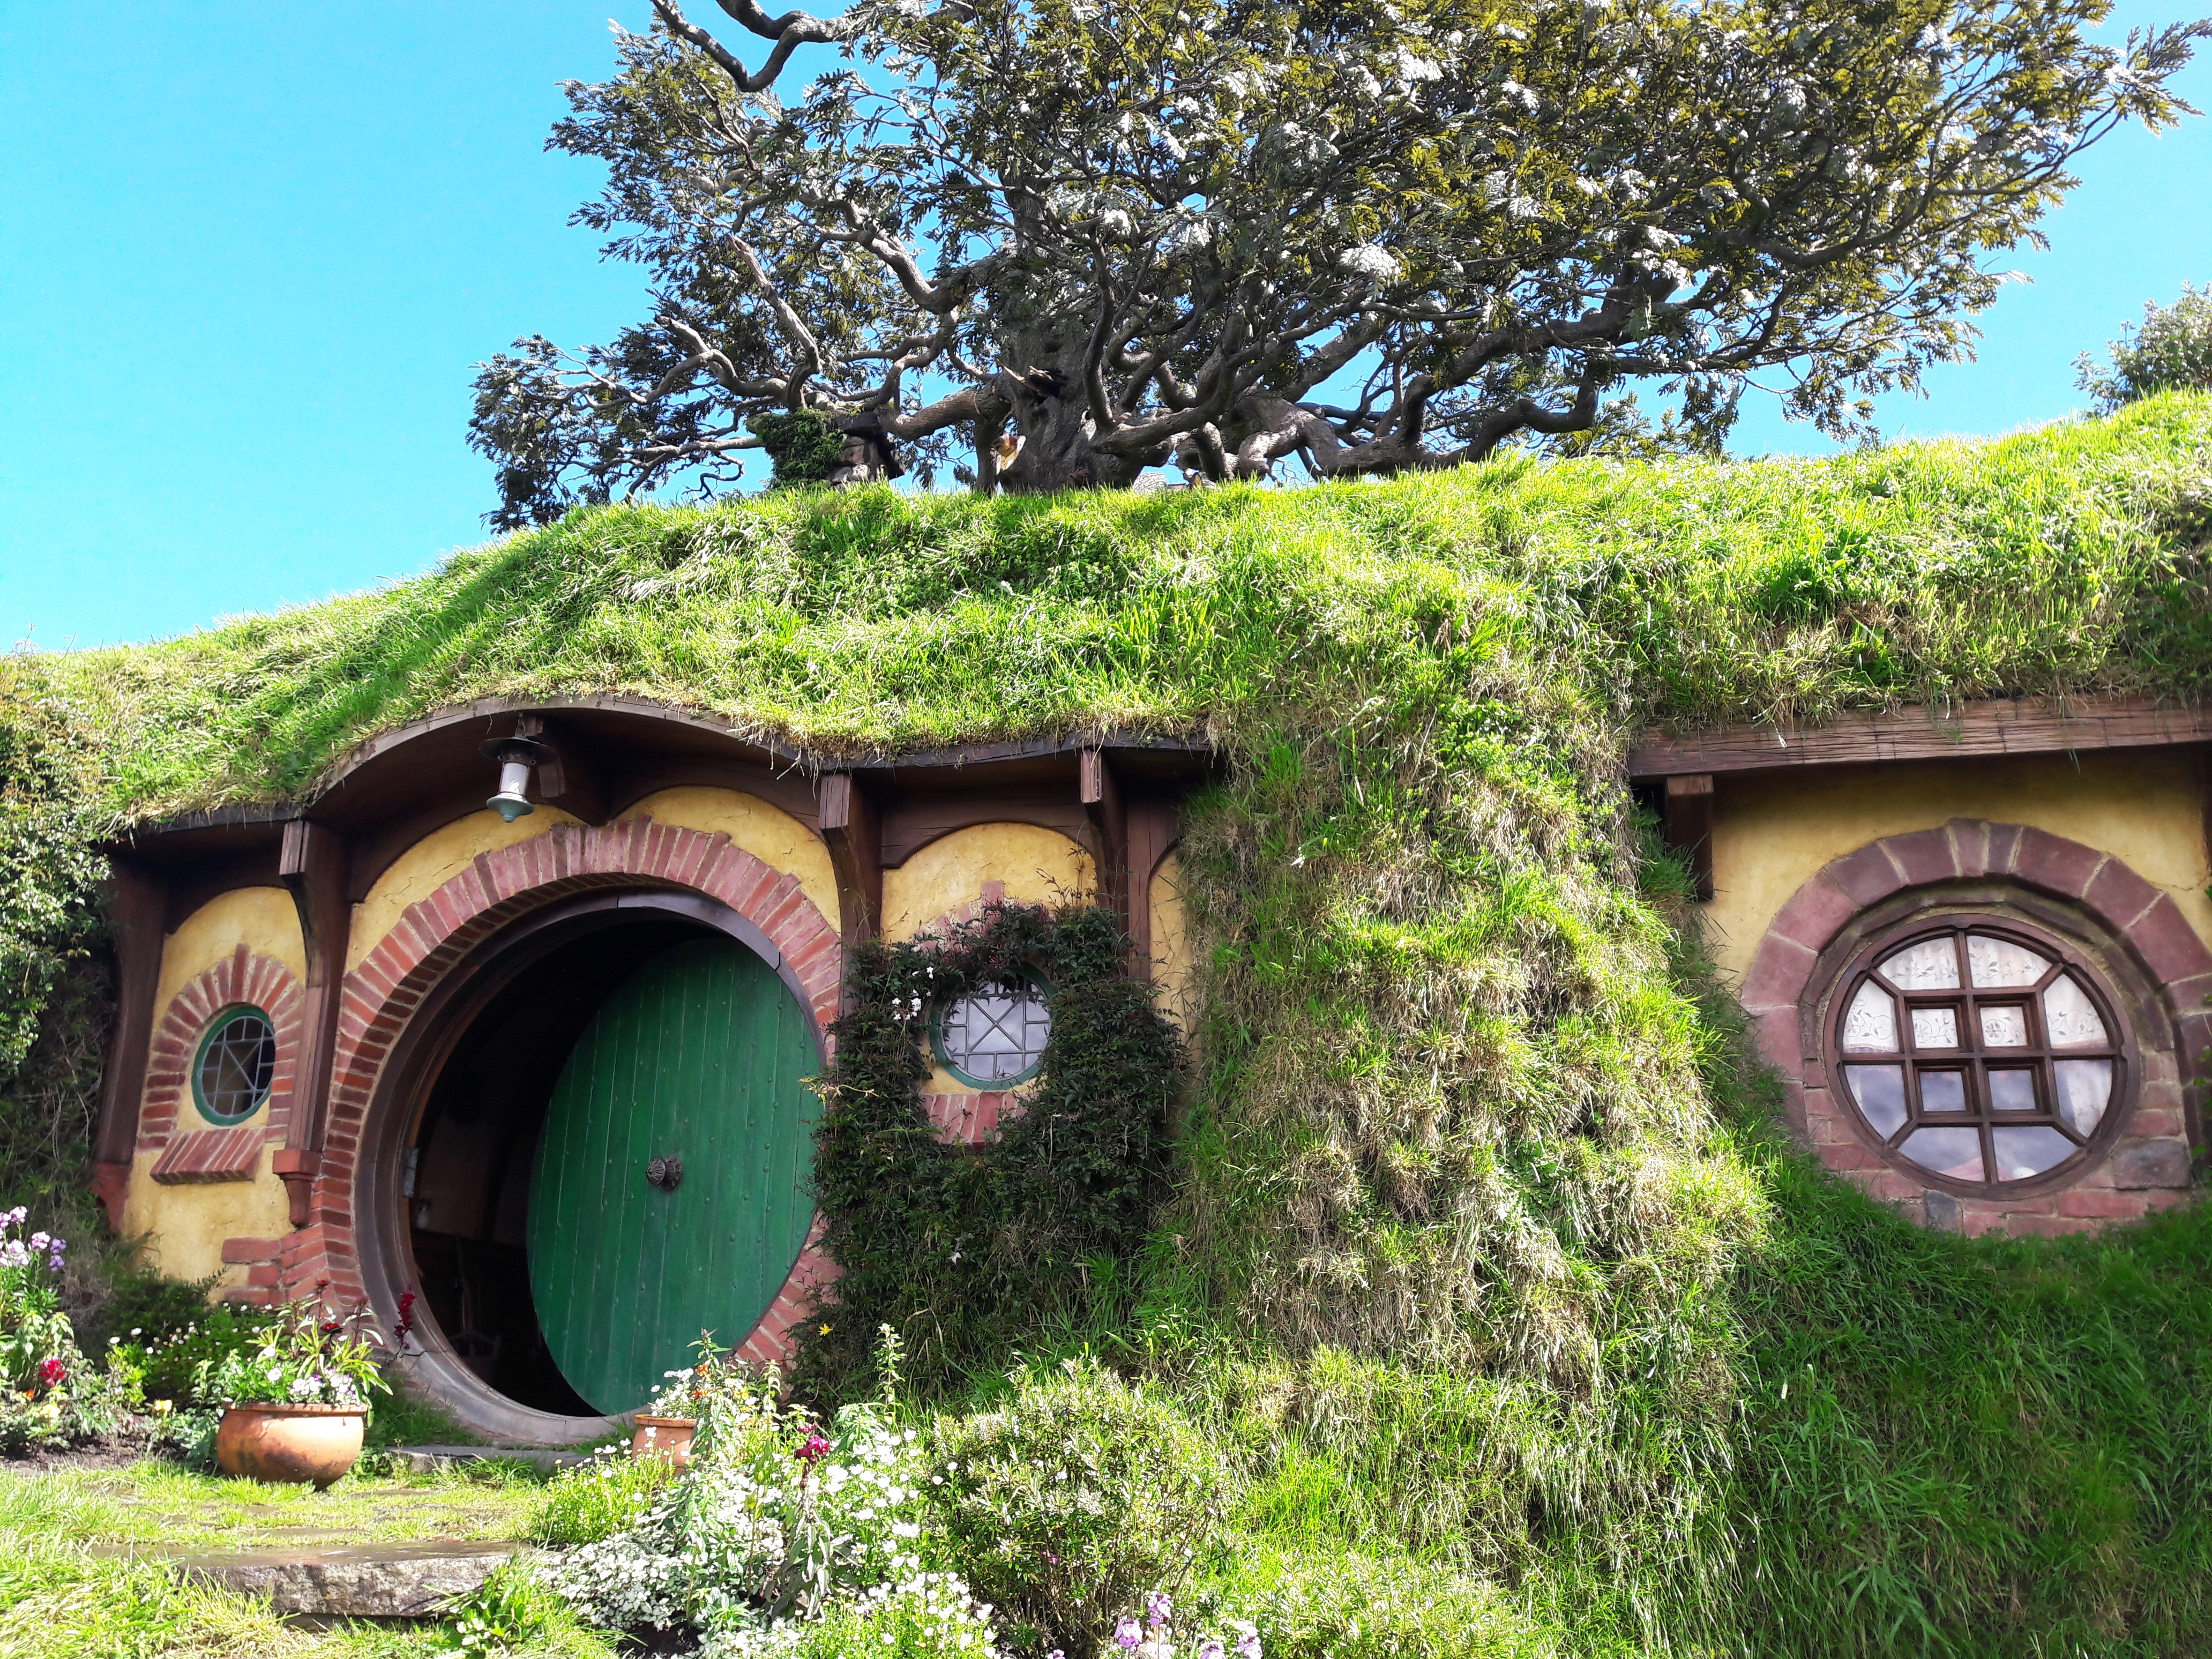 Hobbiton Movie Set is my personal favourite in the Ultimate New Zealand itinerary